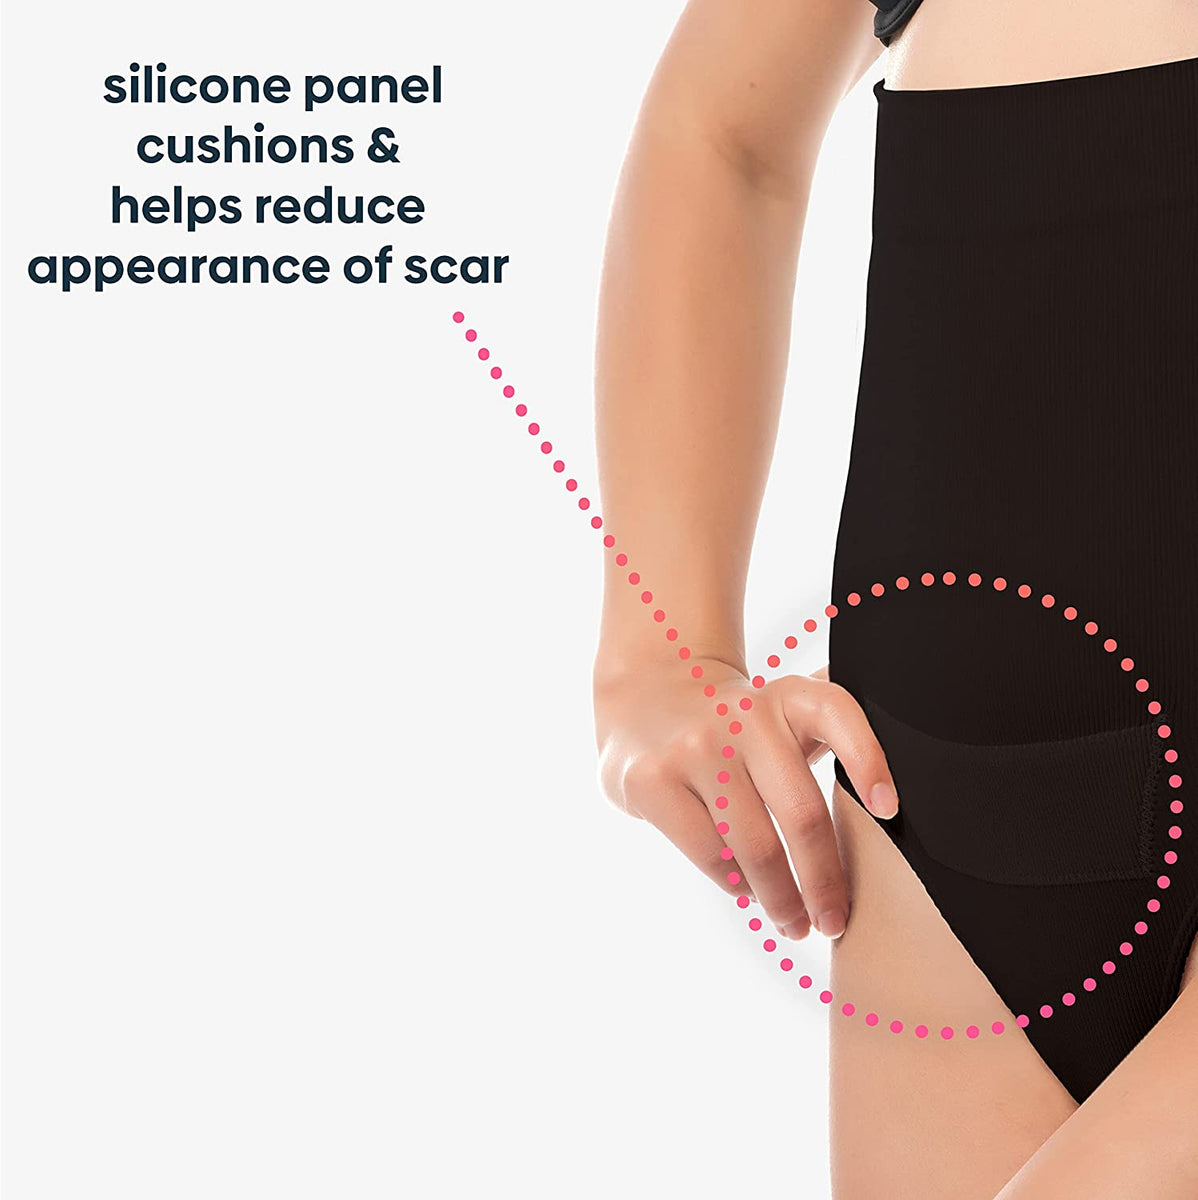 UpSpring C-Panty C-Section Recovery Underwear with Silicone Panel